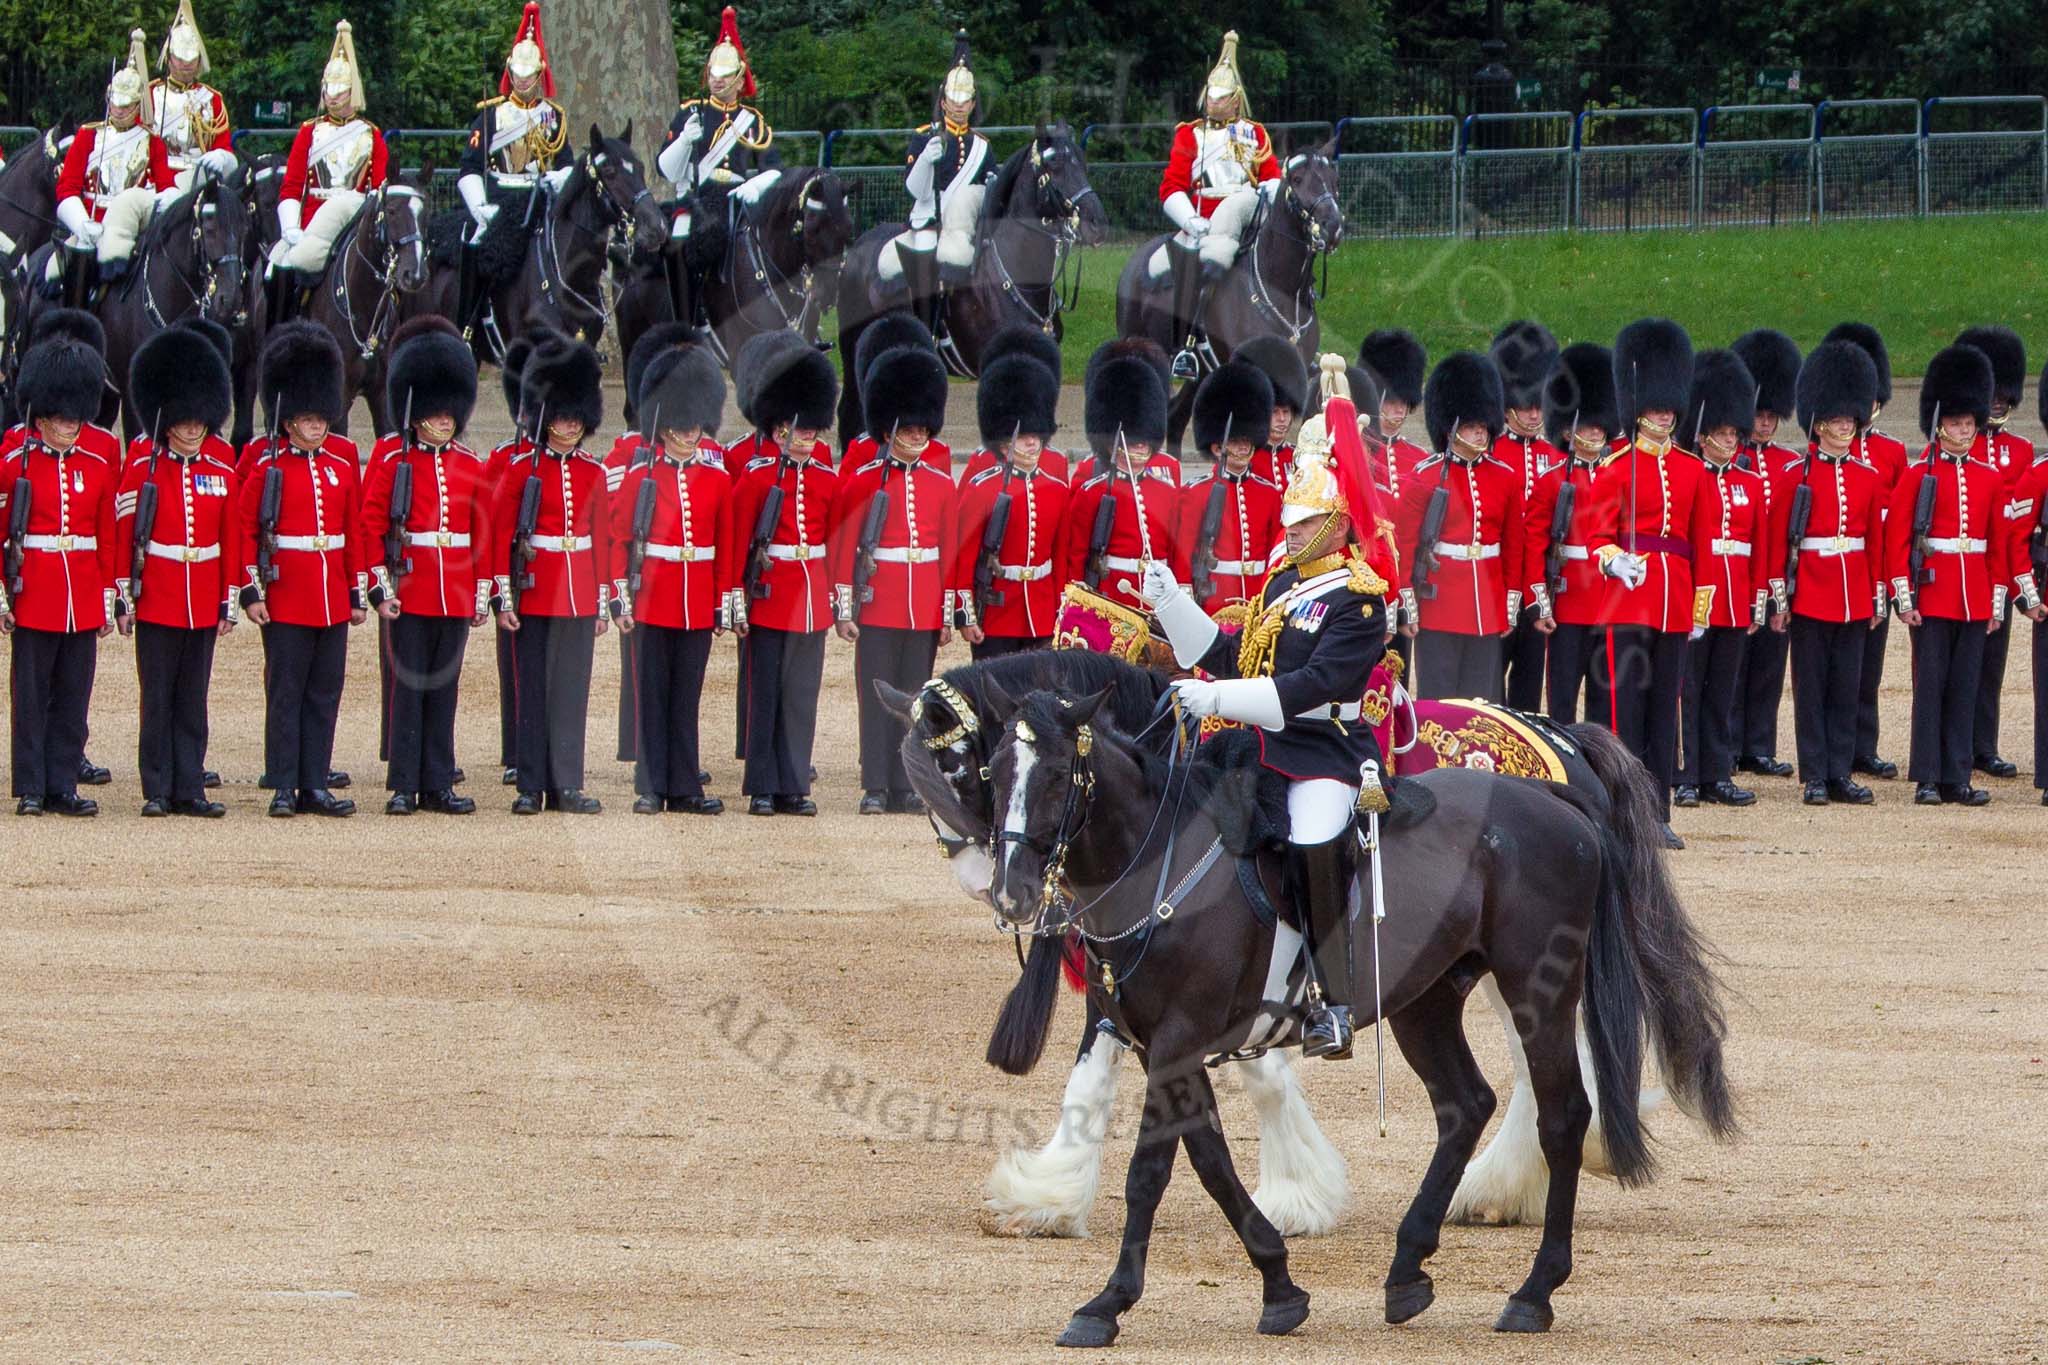 The Colonel's Review 2012: The Senior Director of Music, Lieutenant Colonel S C Barnwell, Welsh Guards, and the Kettle Drummer from The Life Guards behind him..
Horse Guards Parade, Westminster,
London SW1,

United Kingdom,
on 09 June 2012 at 11:50, image #386